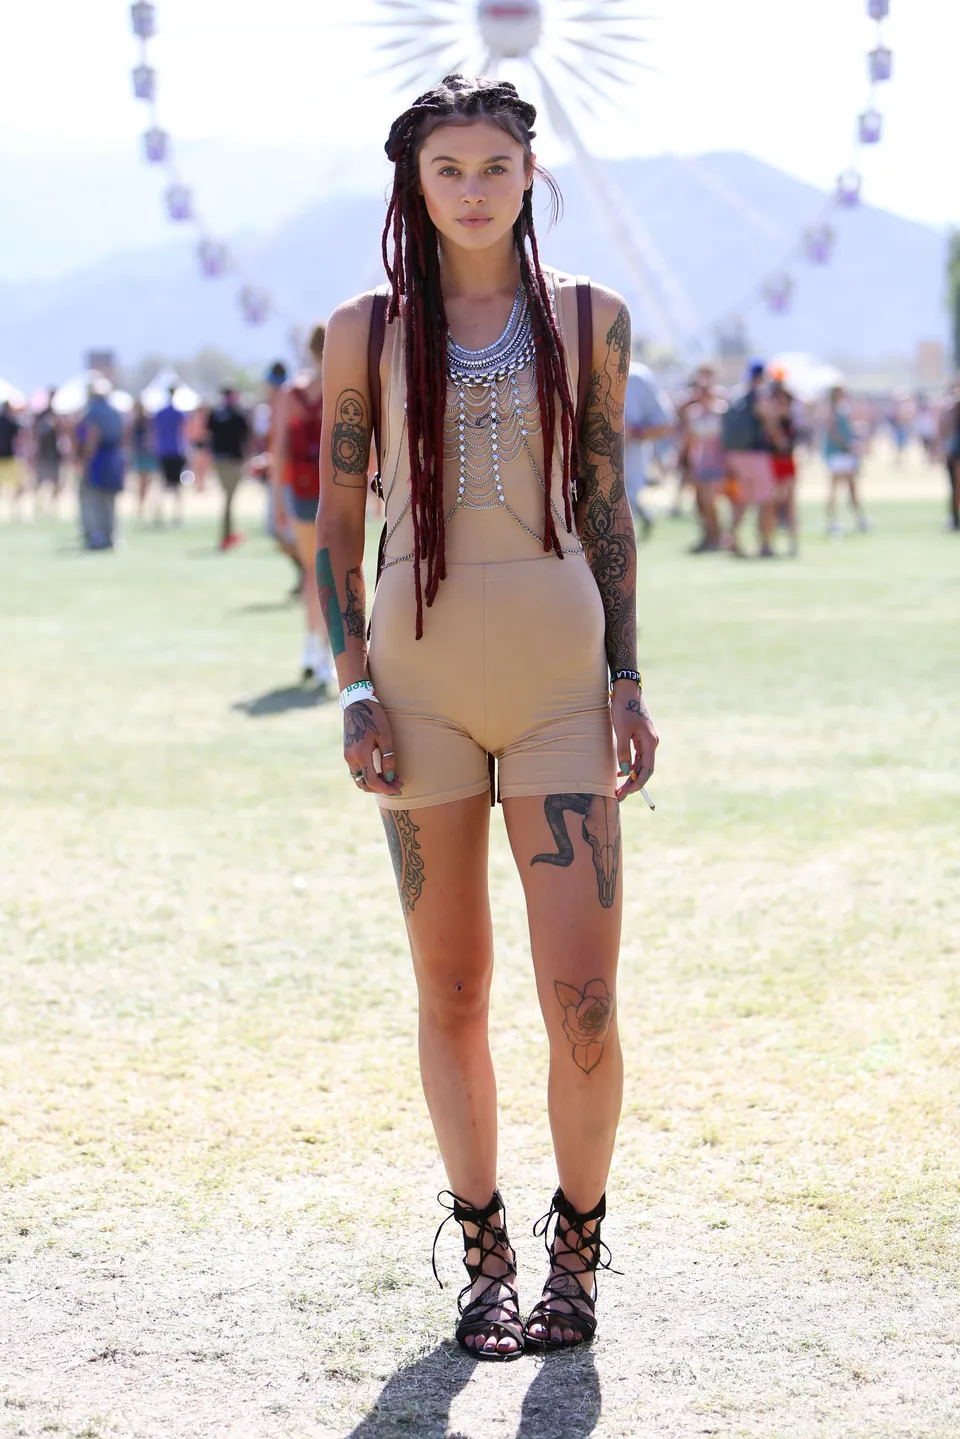 The Most 'Coachella' Outfits At Coachella 2015 | HuffPost Life